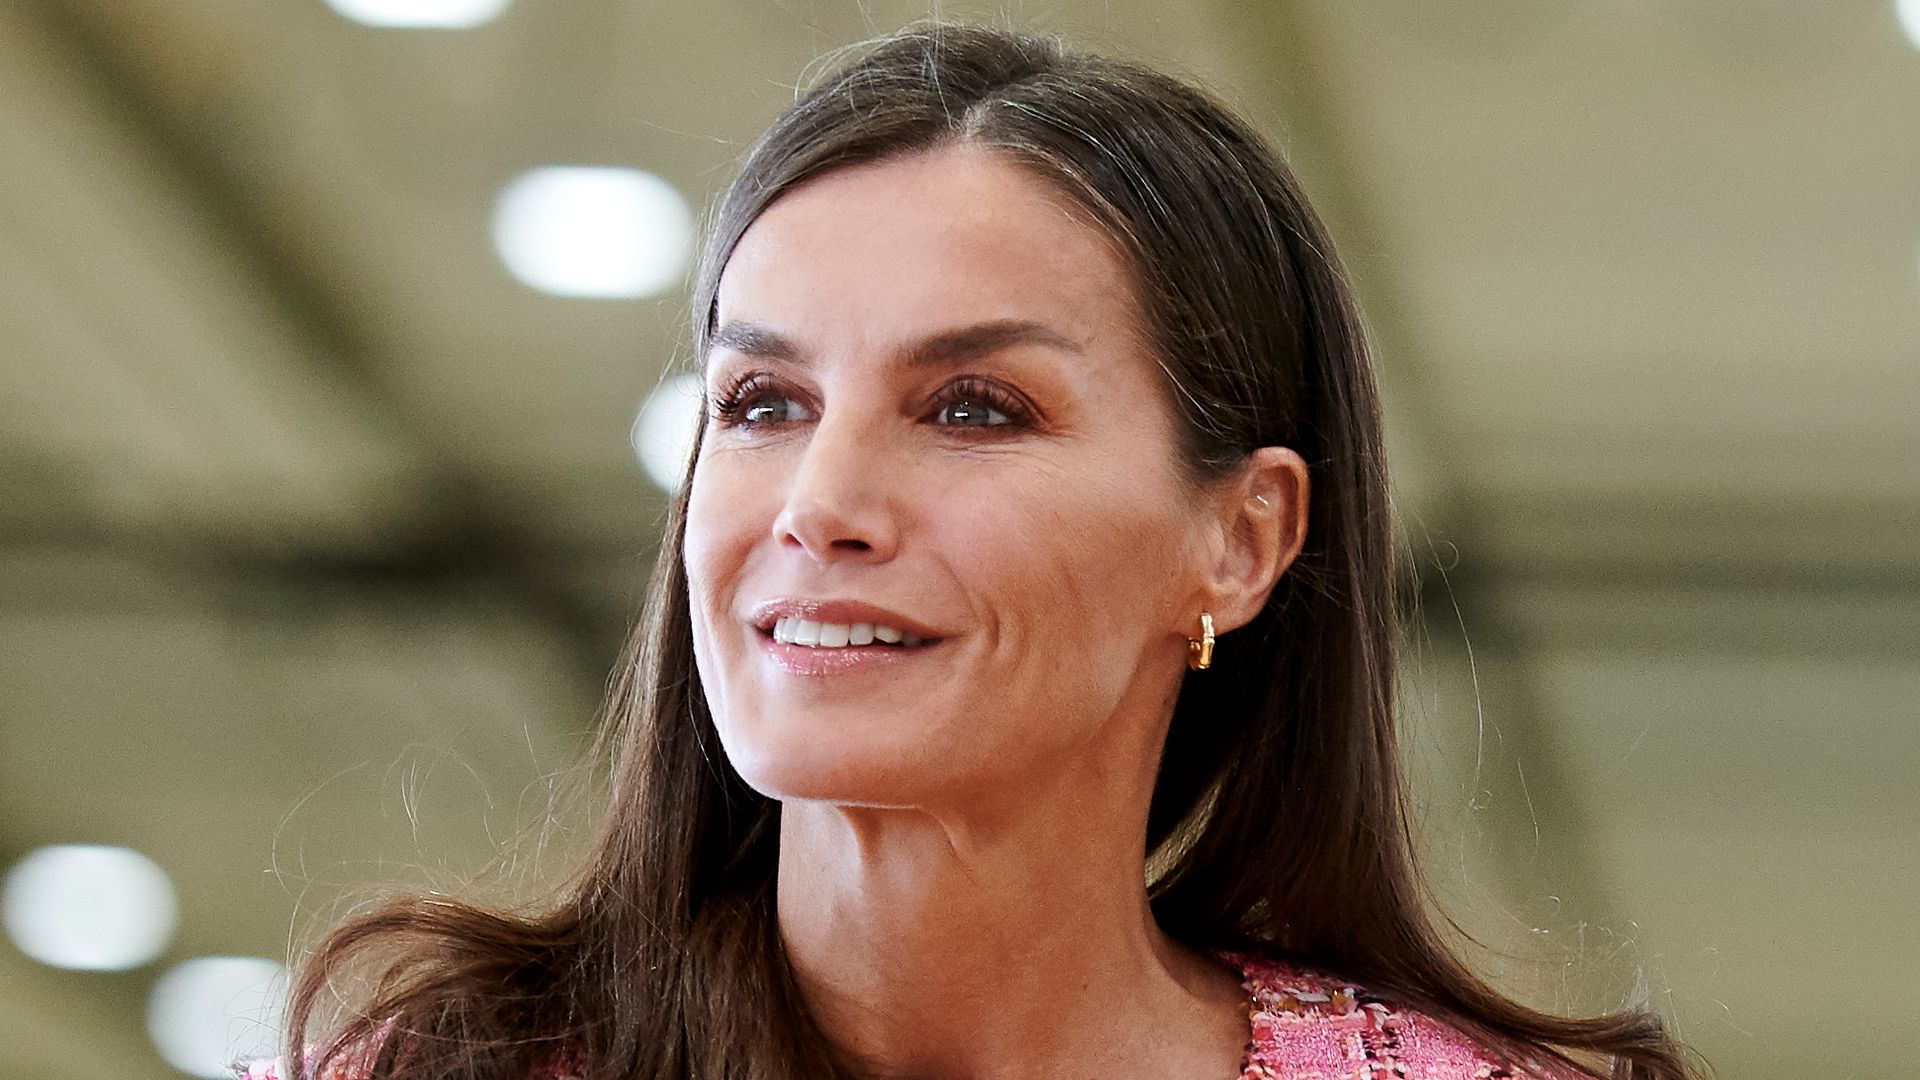 Queen Letizia’s tweed midi dress is a lesson in classic styling